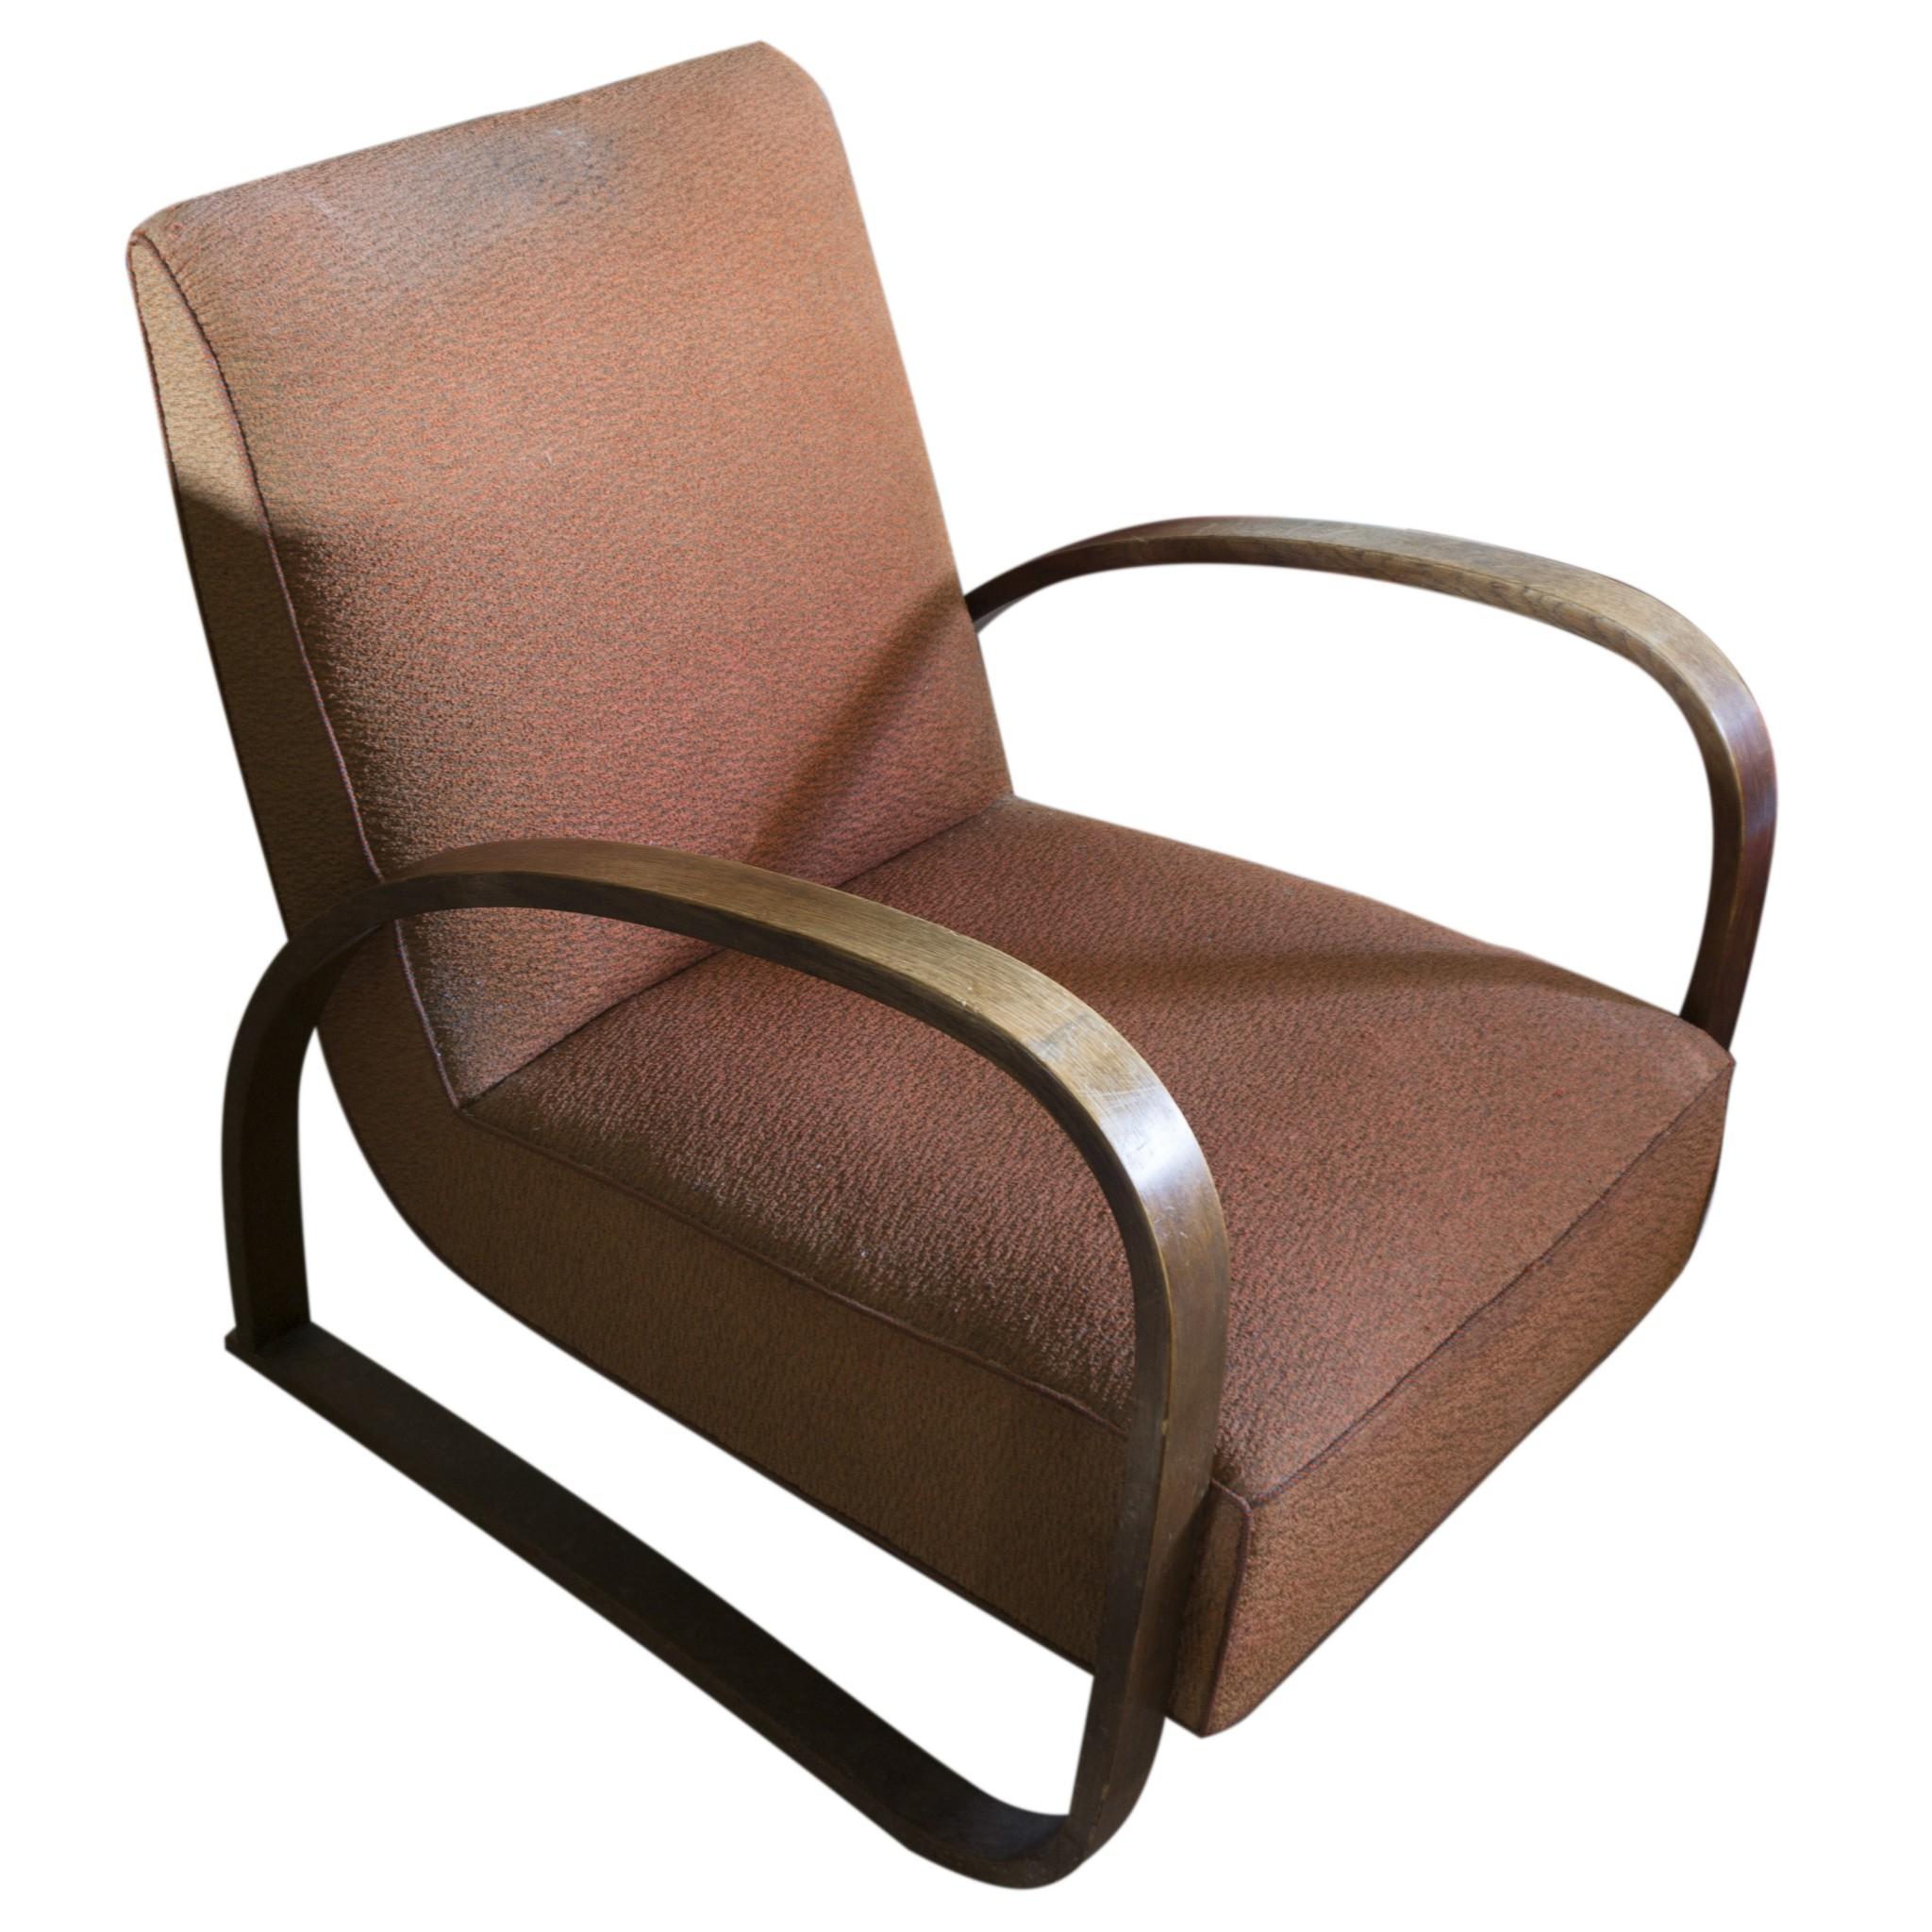 Art Deco ebonized bentwood armchair No. H-70 designed by Jindrich Halabala in the 1930s. it features an original upholstery. The wooden structure is in good original condition.
  
 